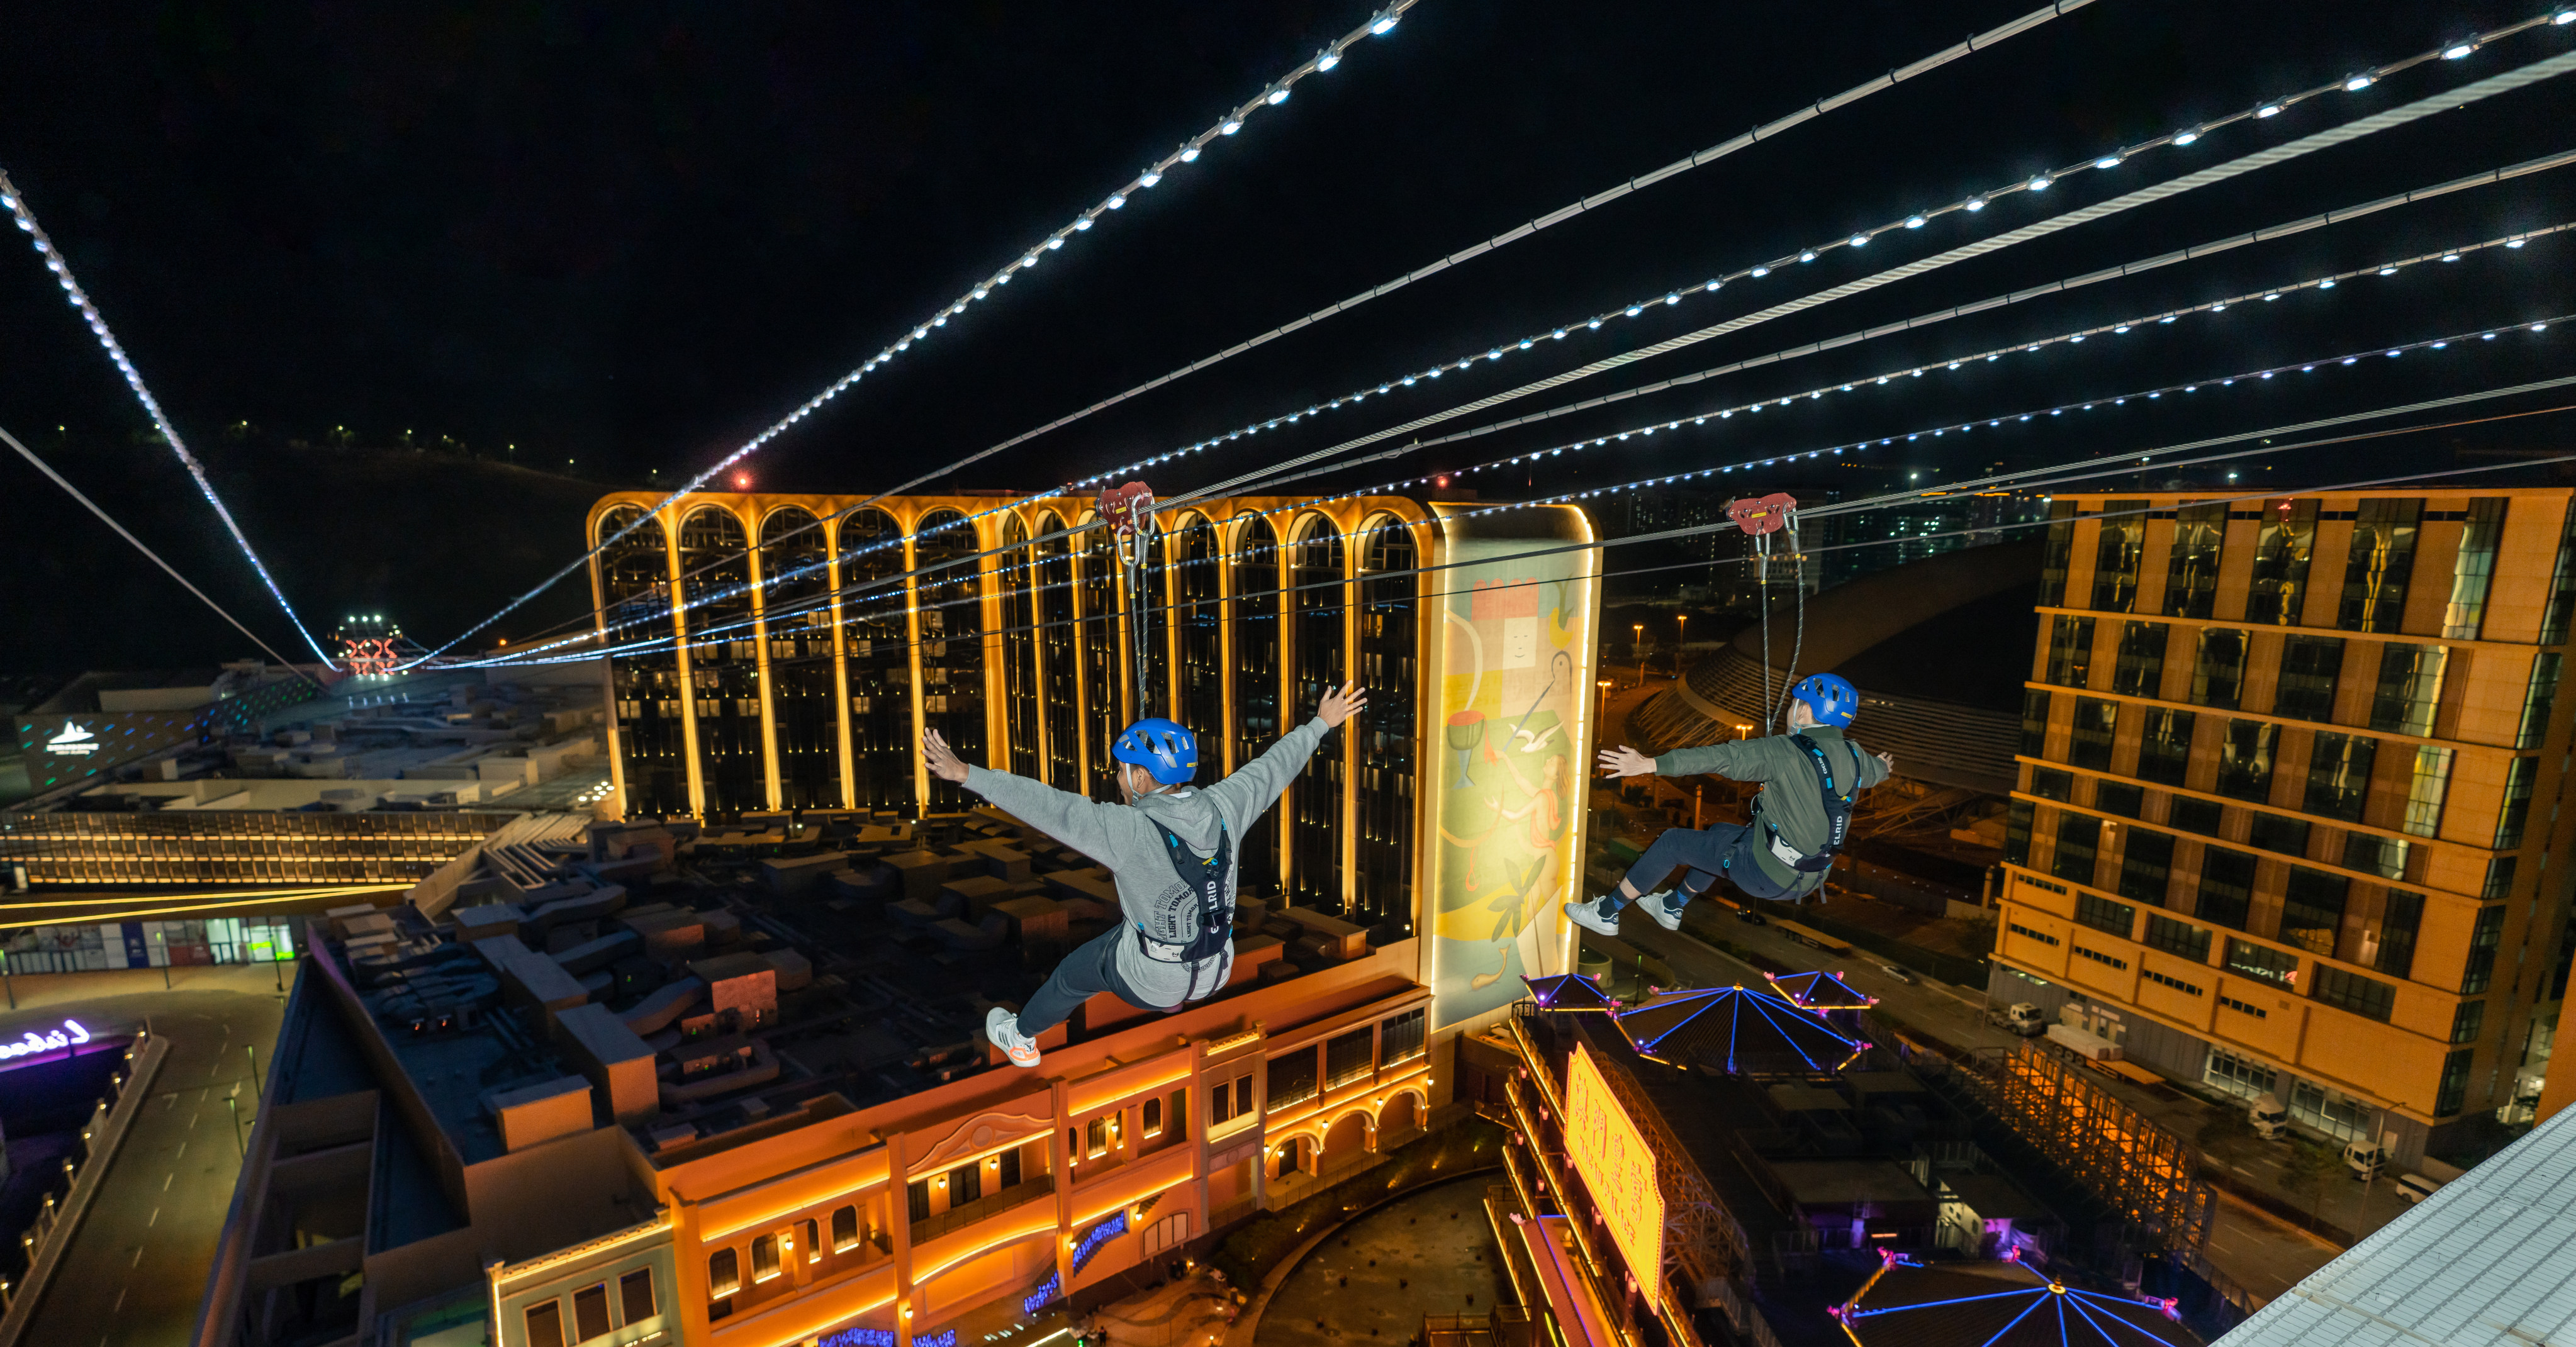 Macau’s just-opened ZipCity zipline attraction offers evening excursions over Cotai accompanied by an audiovisual show illuminated by more than 100,000 LED lights. Night tourism is expected to be a significant draw as Chinese tourists return to global destinations. Photo: ZipCity